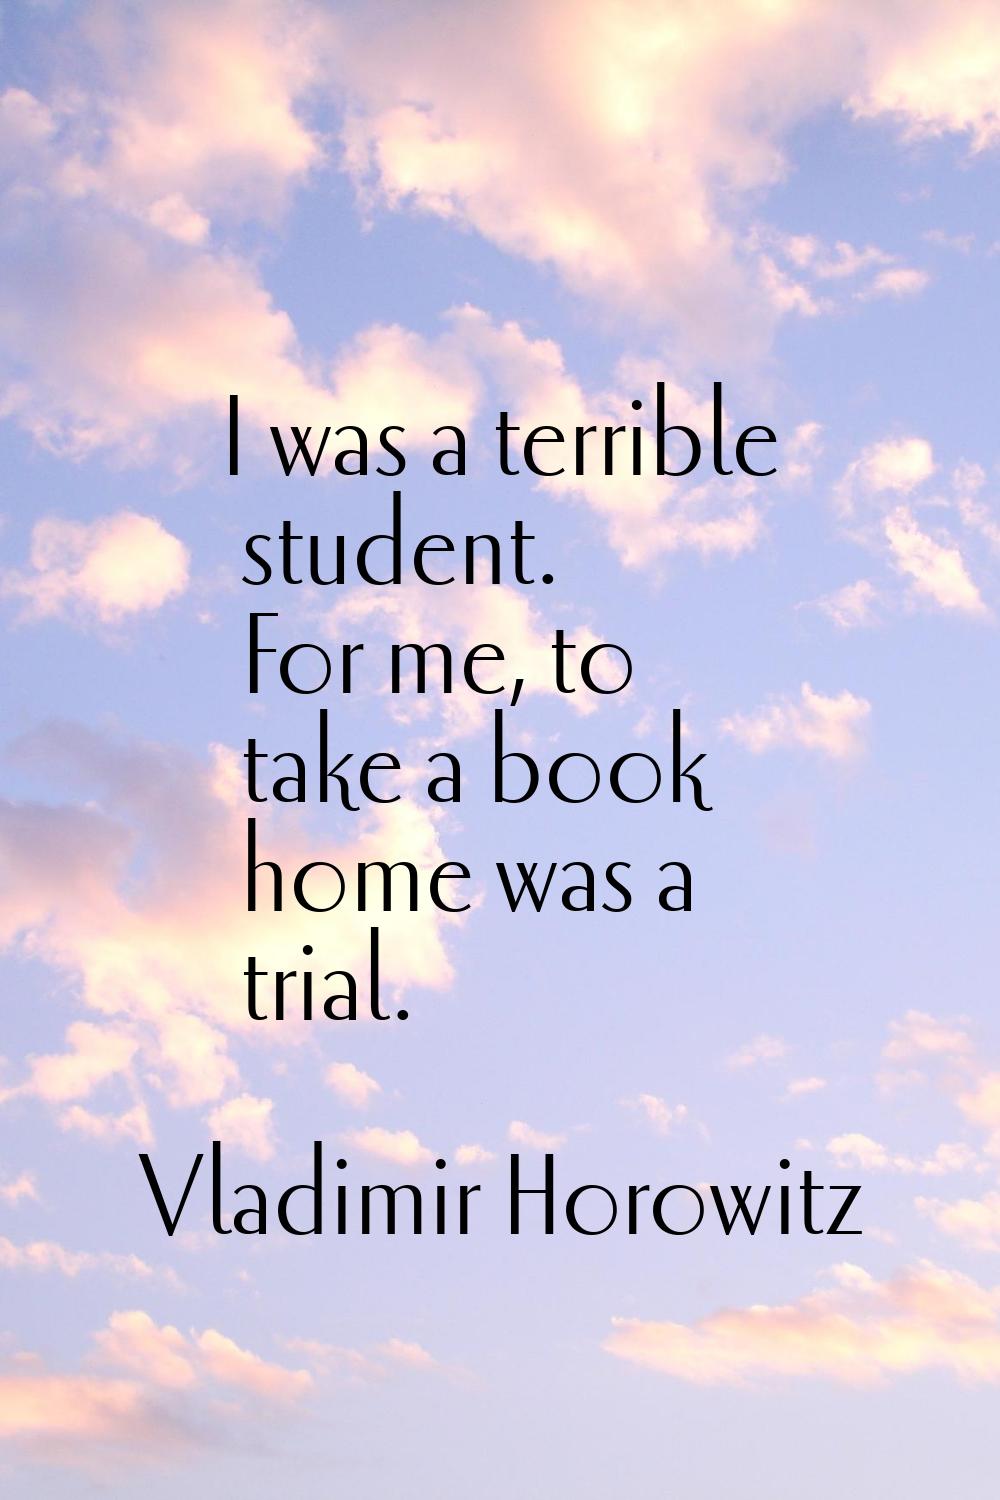 I was a terrible student. For me, to take a book home was a trial.